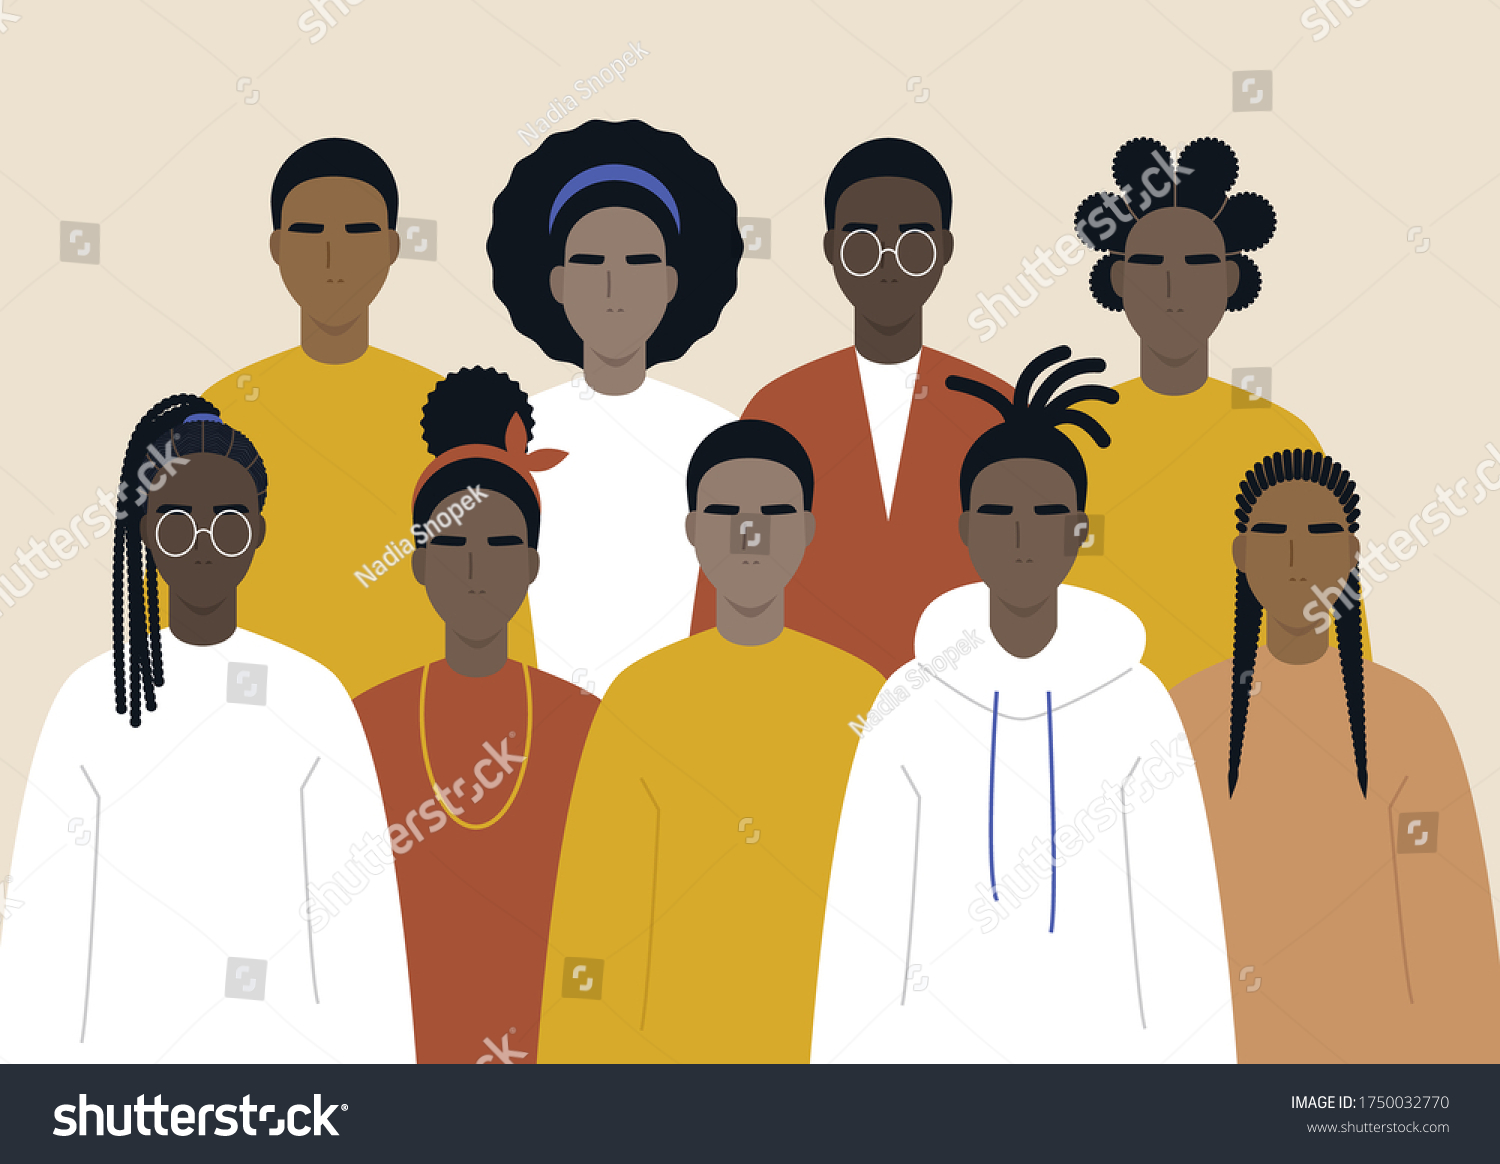 SVG of Black community, african people gathered together, a set of male and female characters wearing casual clothes and different hairstyles svg